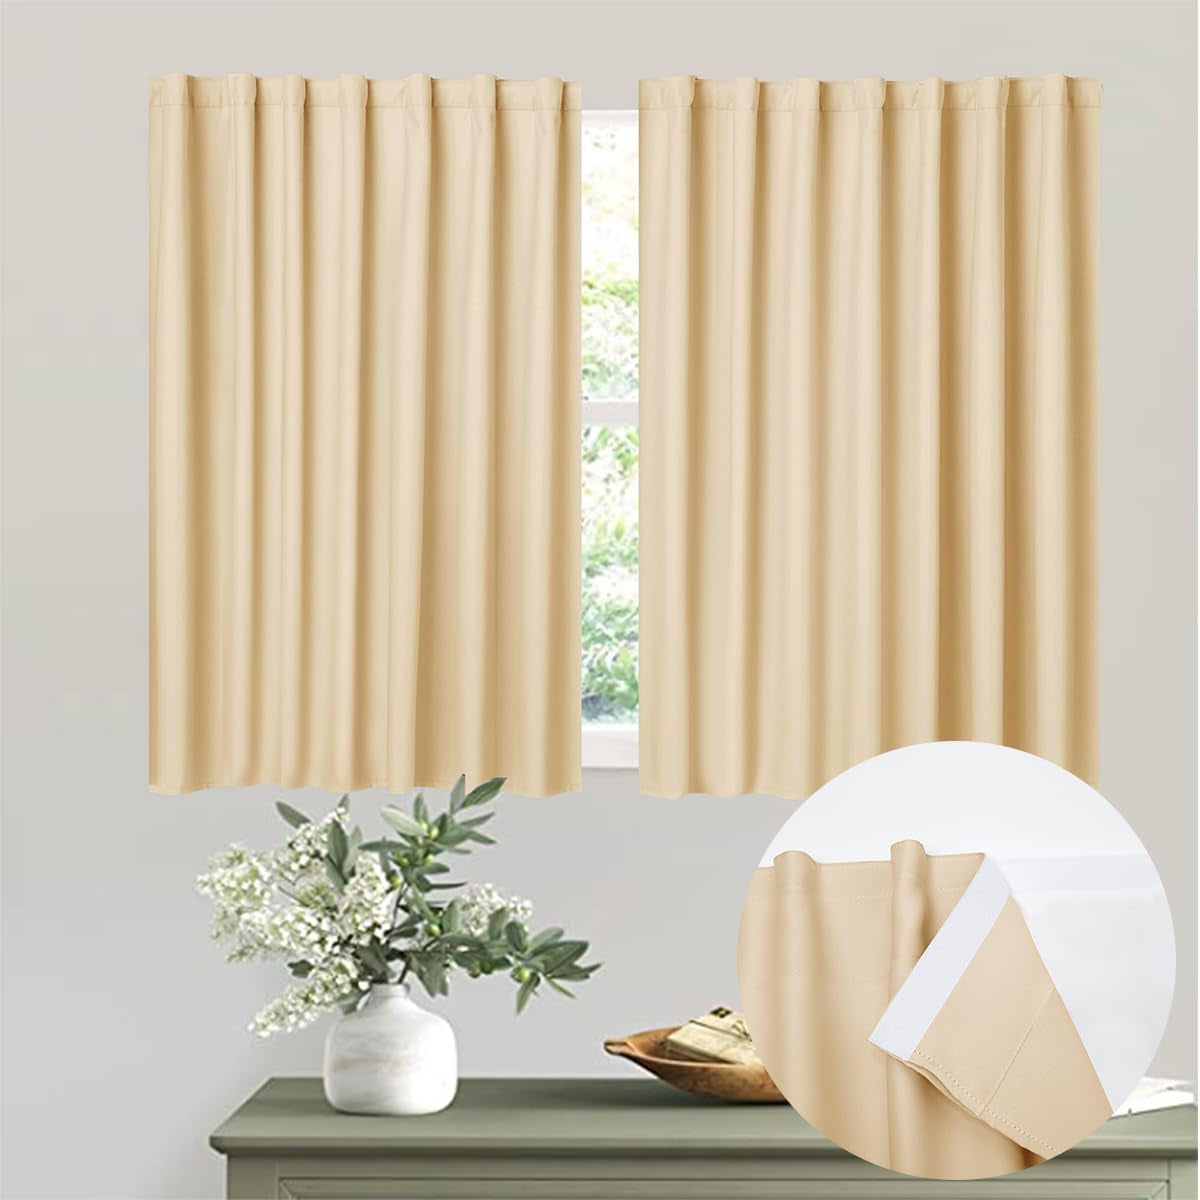 Muamar 2Pcs Blackout Curtains Privacy Curtains 63 Inch Length Window Curtains,Easy Install Thermal Insulated Window Shades,Stick Curtains No Rods, Black 42" W X 63" L  Muamar Beige 29"W X 36"L 